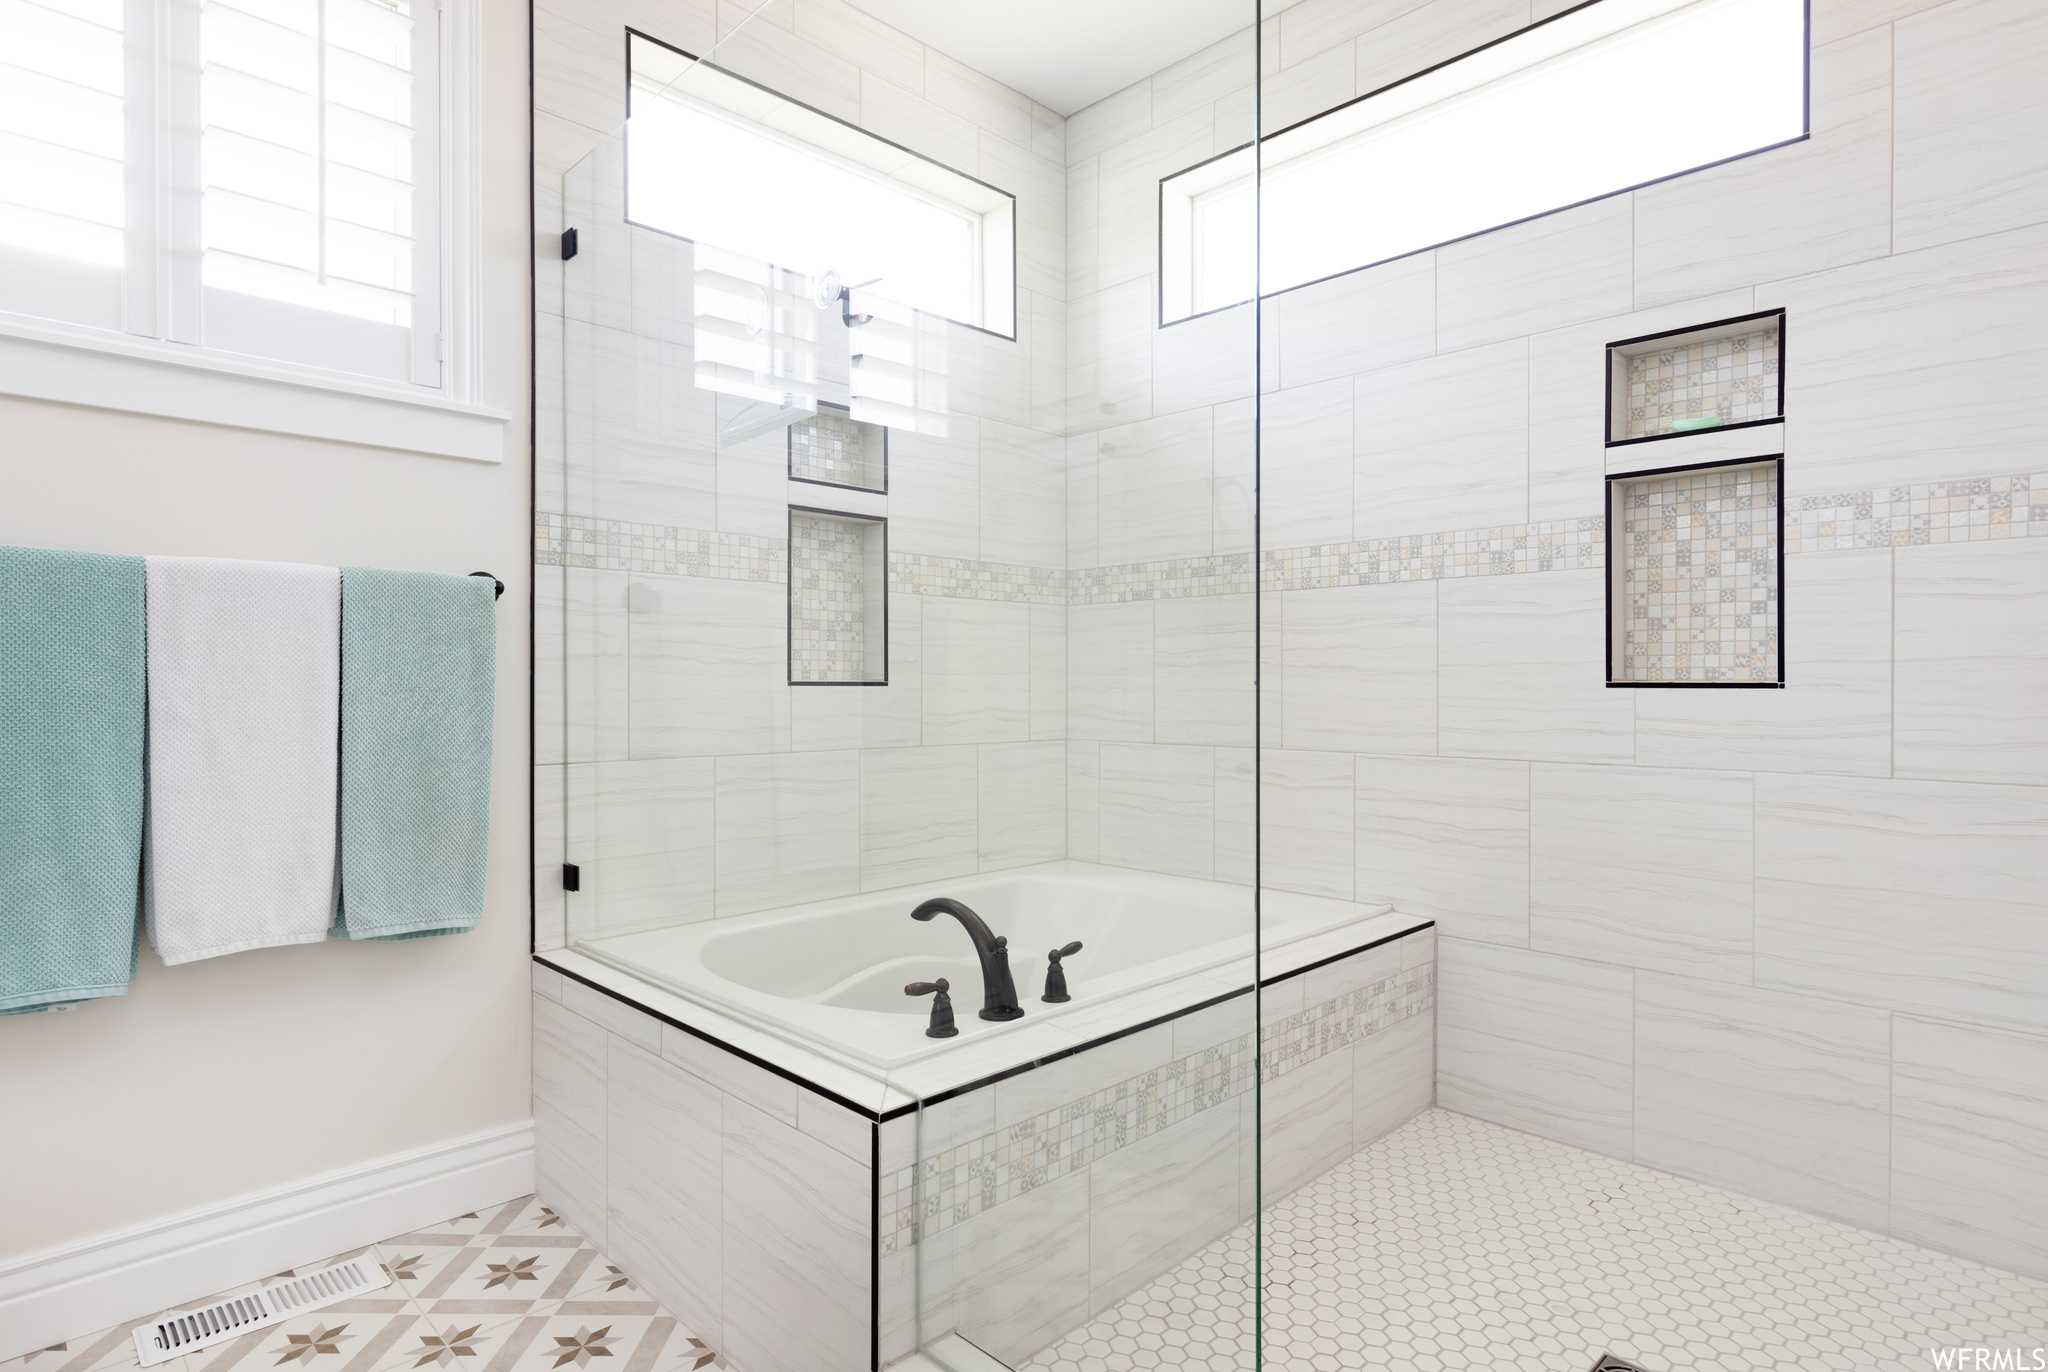 Bathroom with a healthy amount of sunlight, tile floors, and shower with separate bathtub